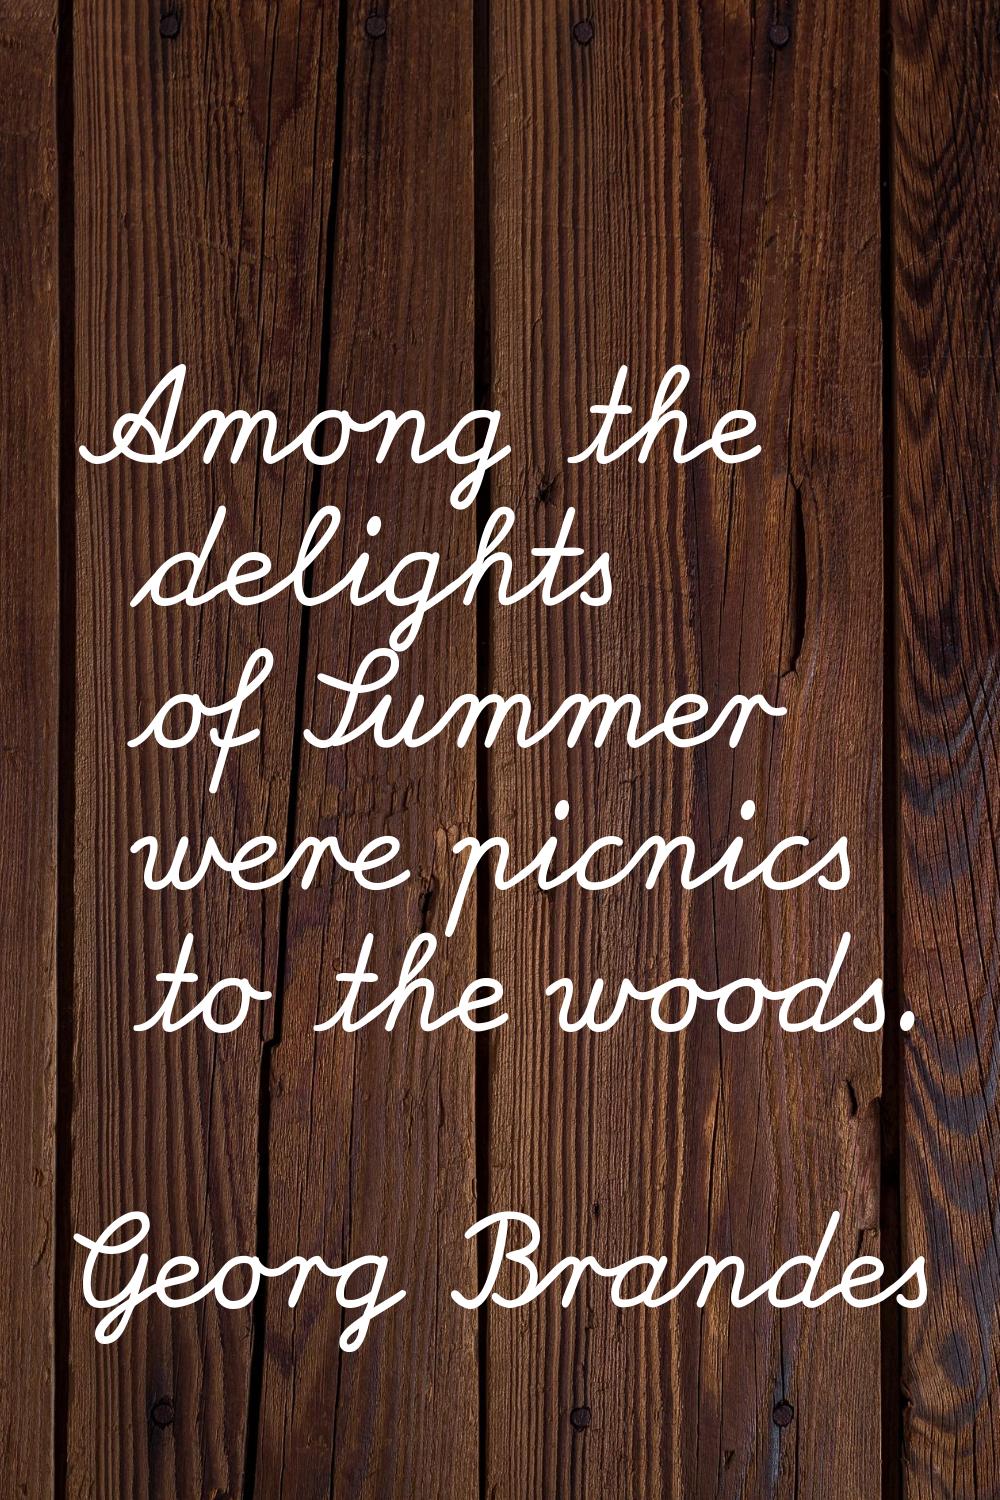 Among the delights of Summer were picnics to the woods.